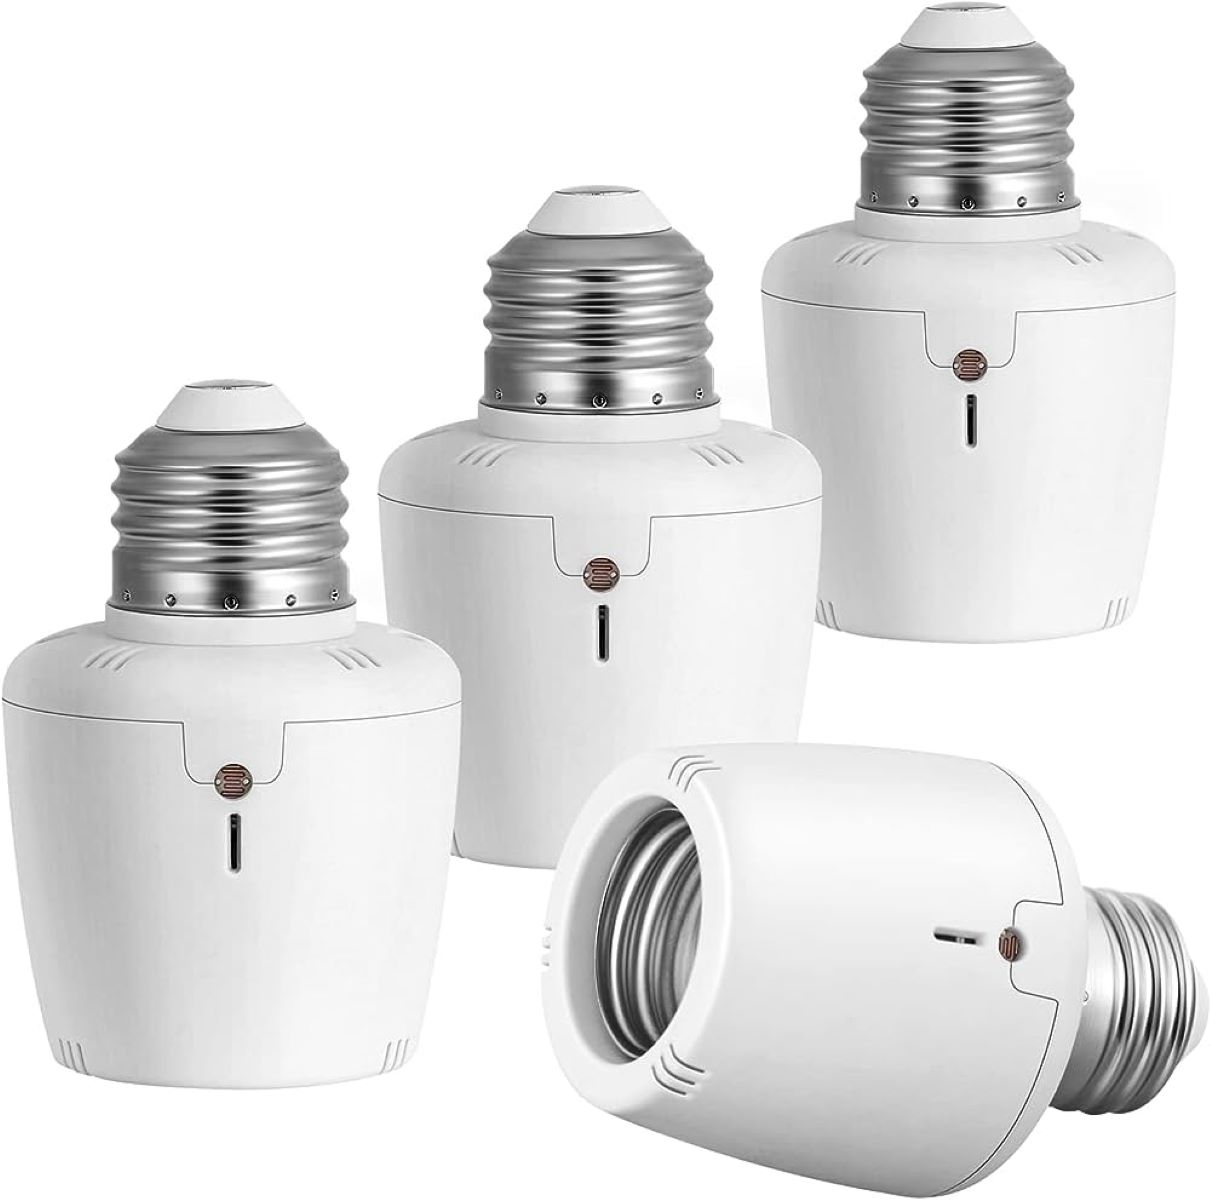 15 Best Automatic Light Socket for 2023